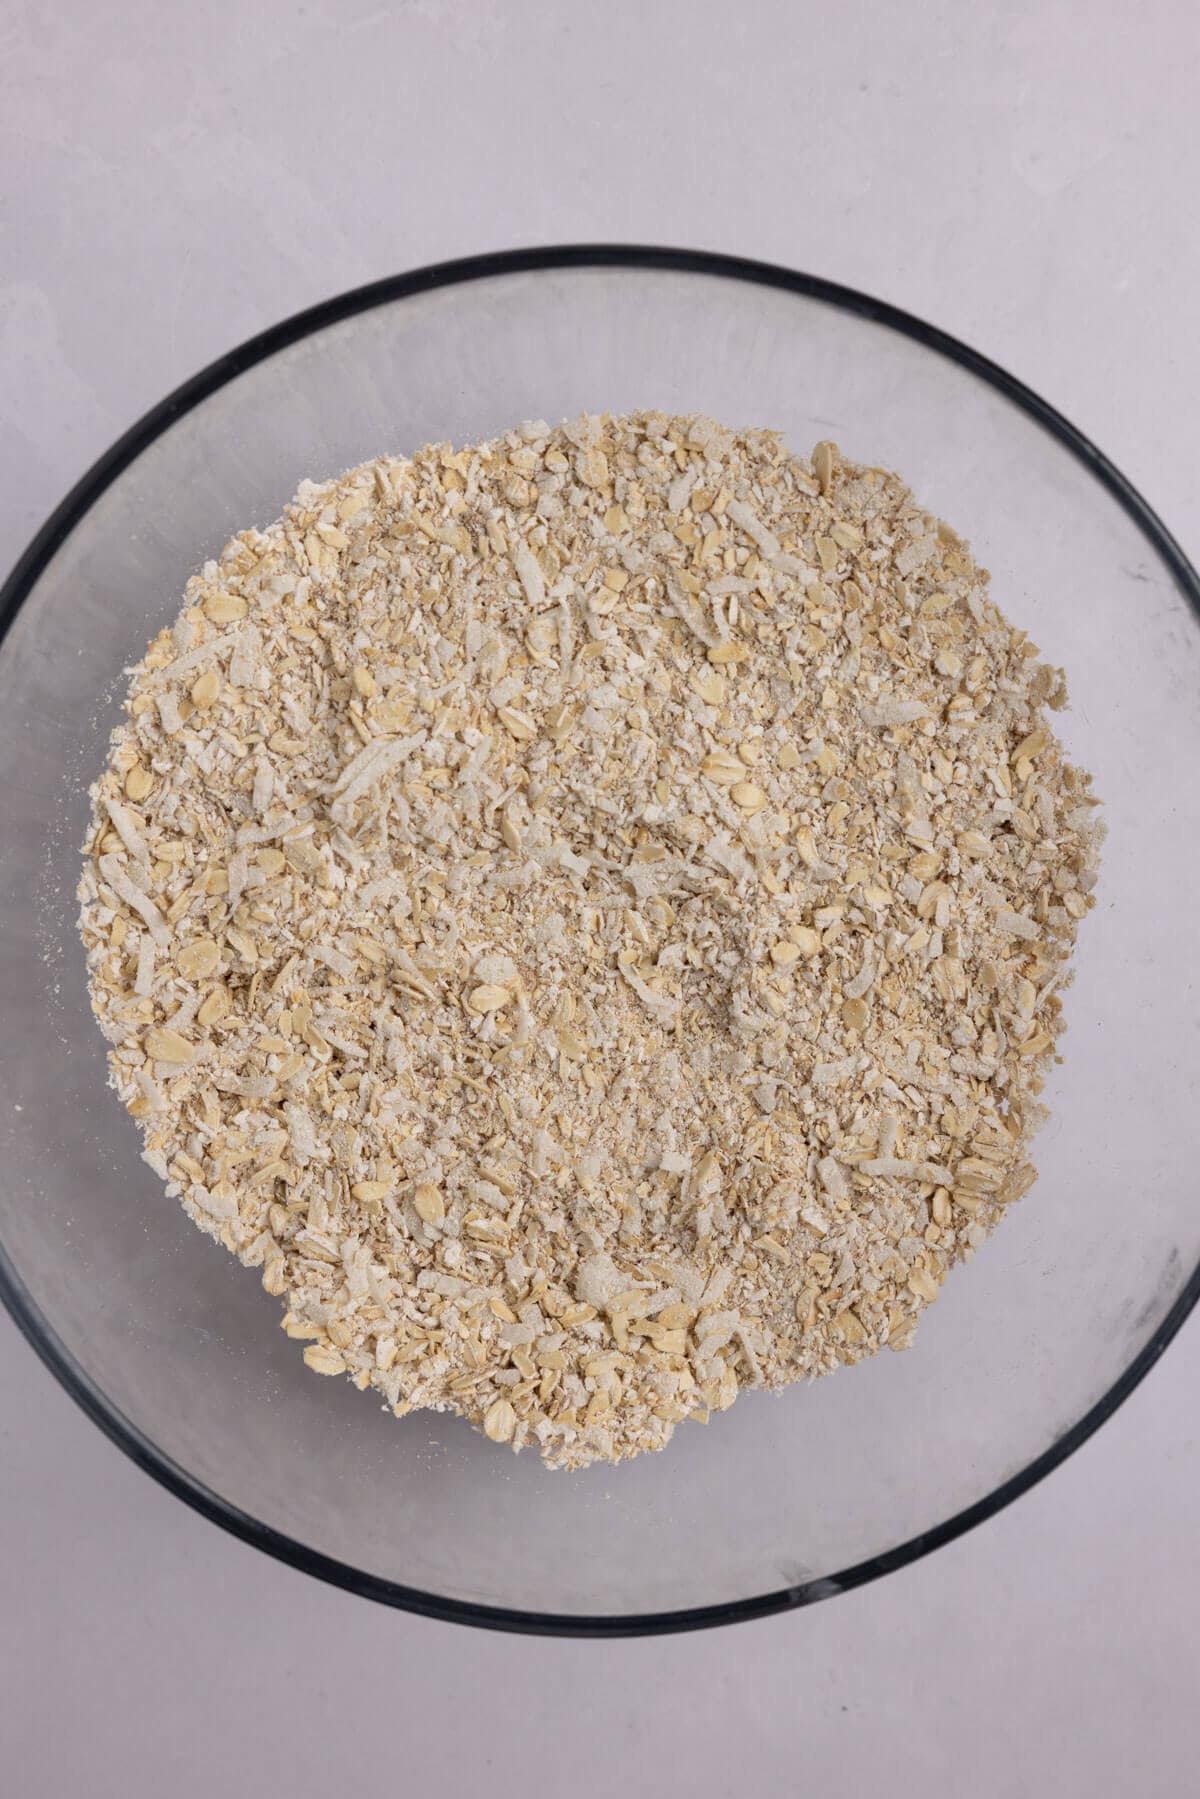 A large mixing bowl of blended oats with shredded coconut and salt.